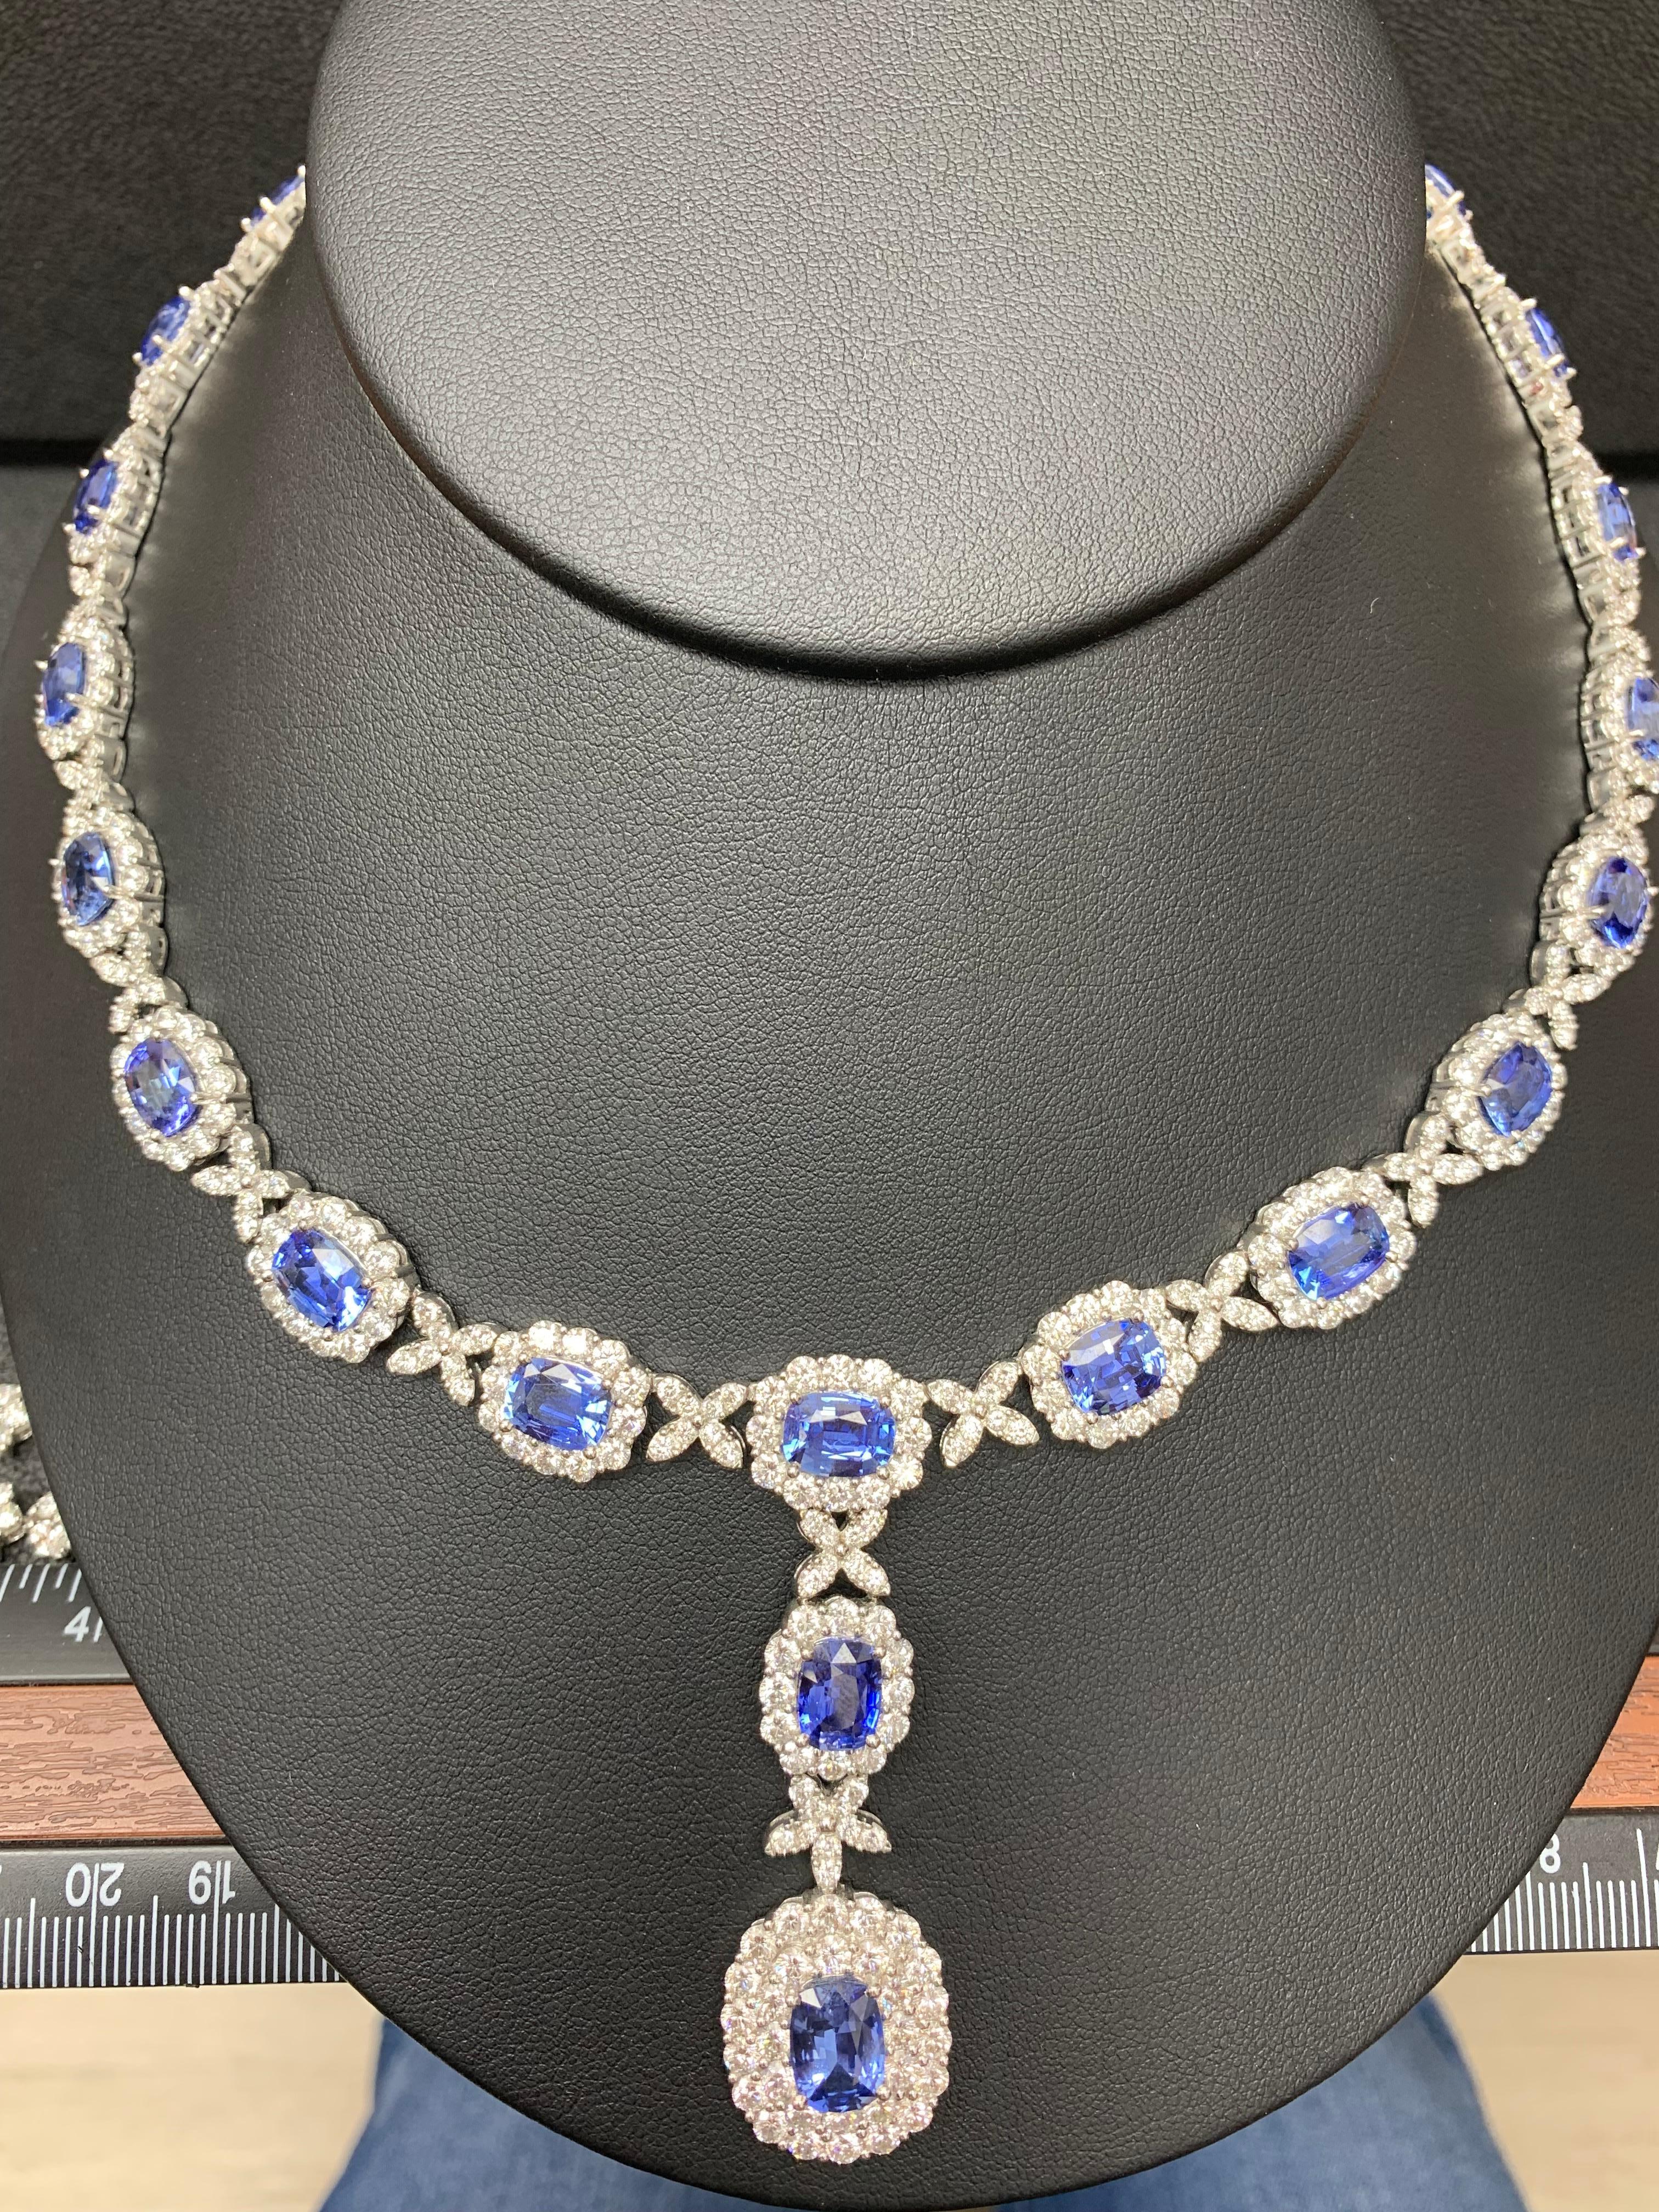 32.91 Carat Oval Cut Sapphire and Diamond Drop Necklace in 18K White Gold For Sale 11